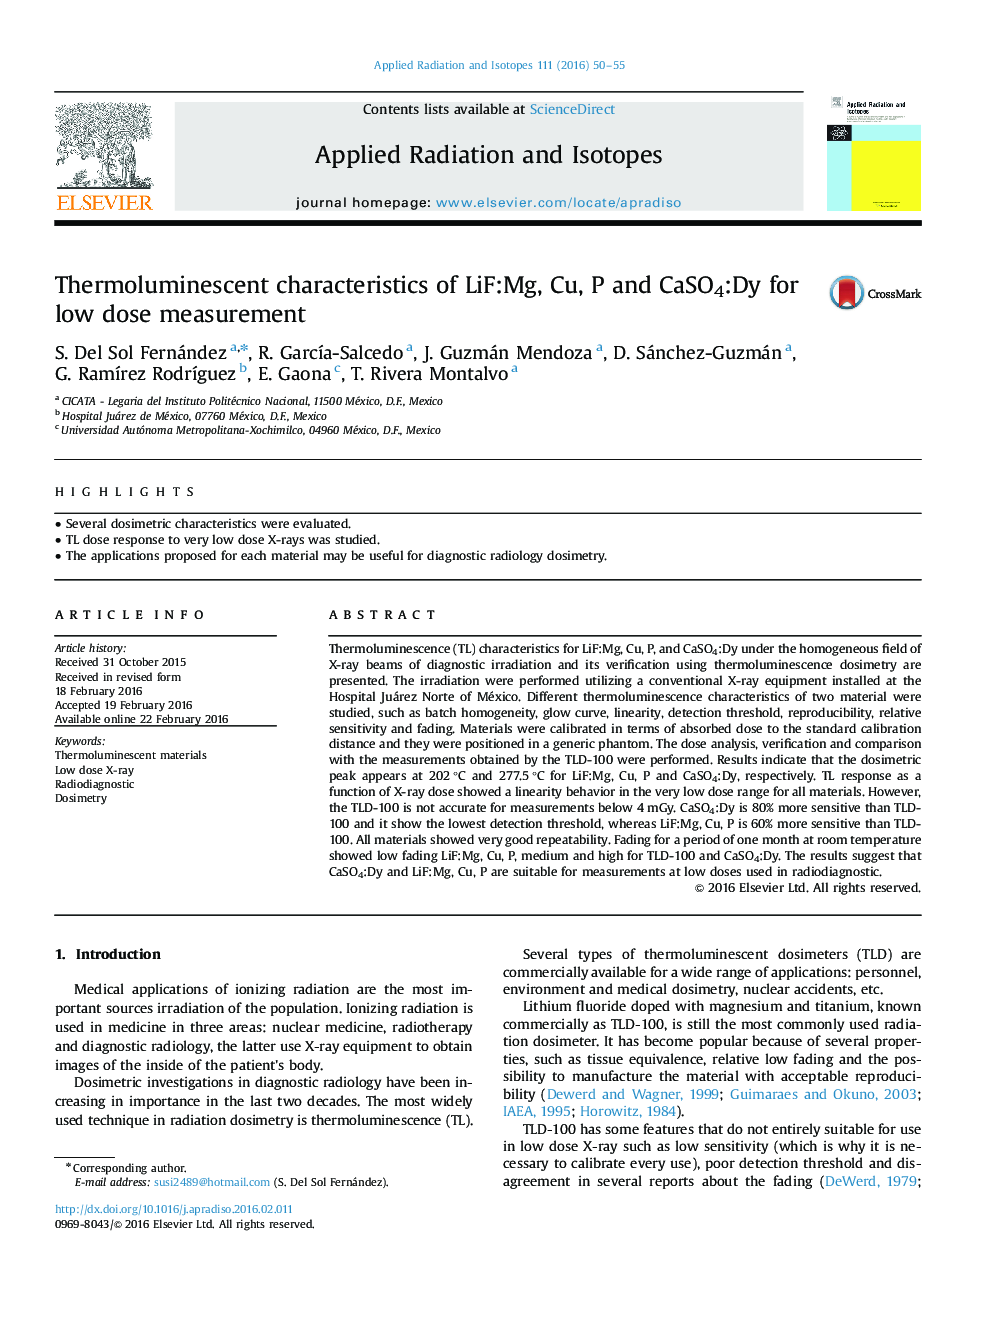 Thermoluminescent characteristics of LiF:Mg, Cu, P and CaSO4:Dy for low dose measurement